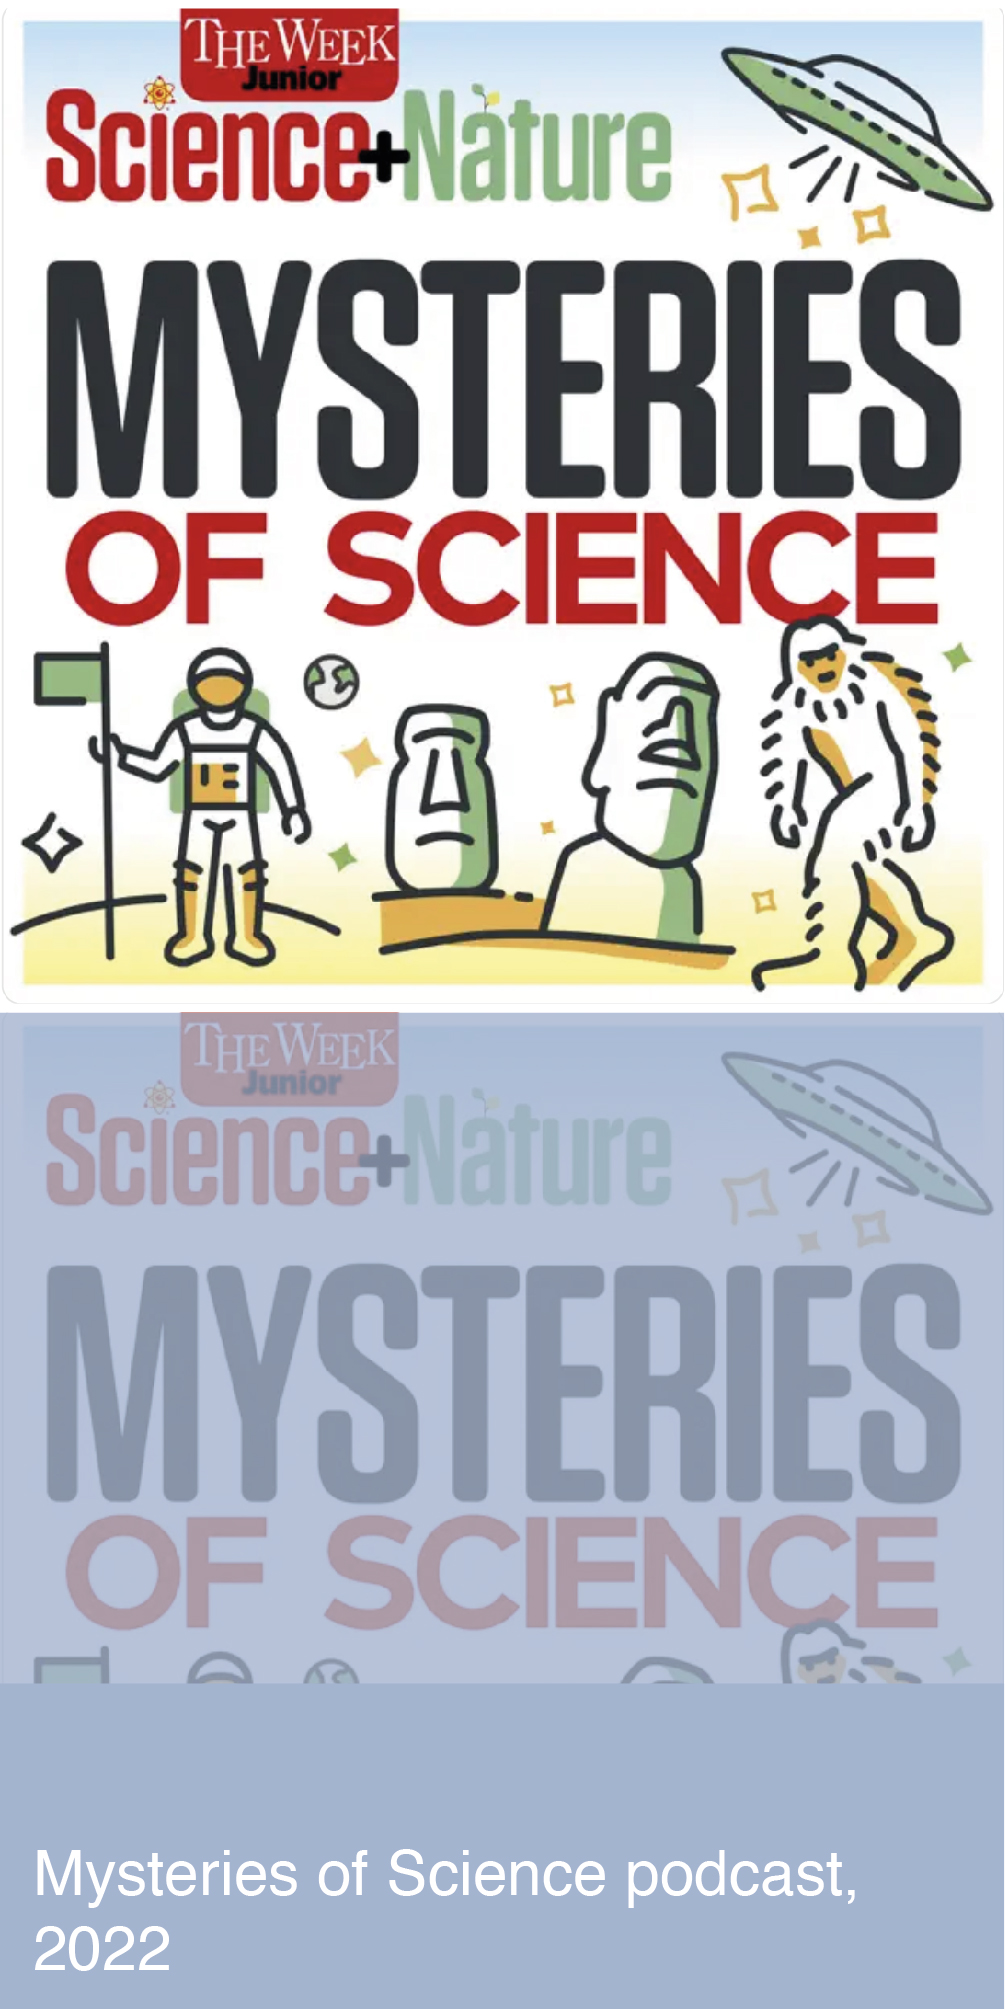 Mysteries of science podcast